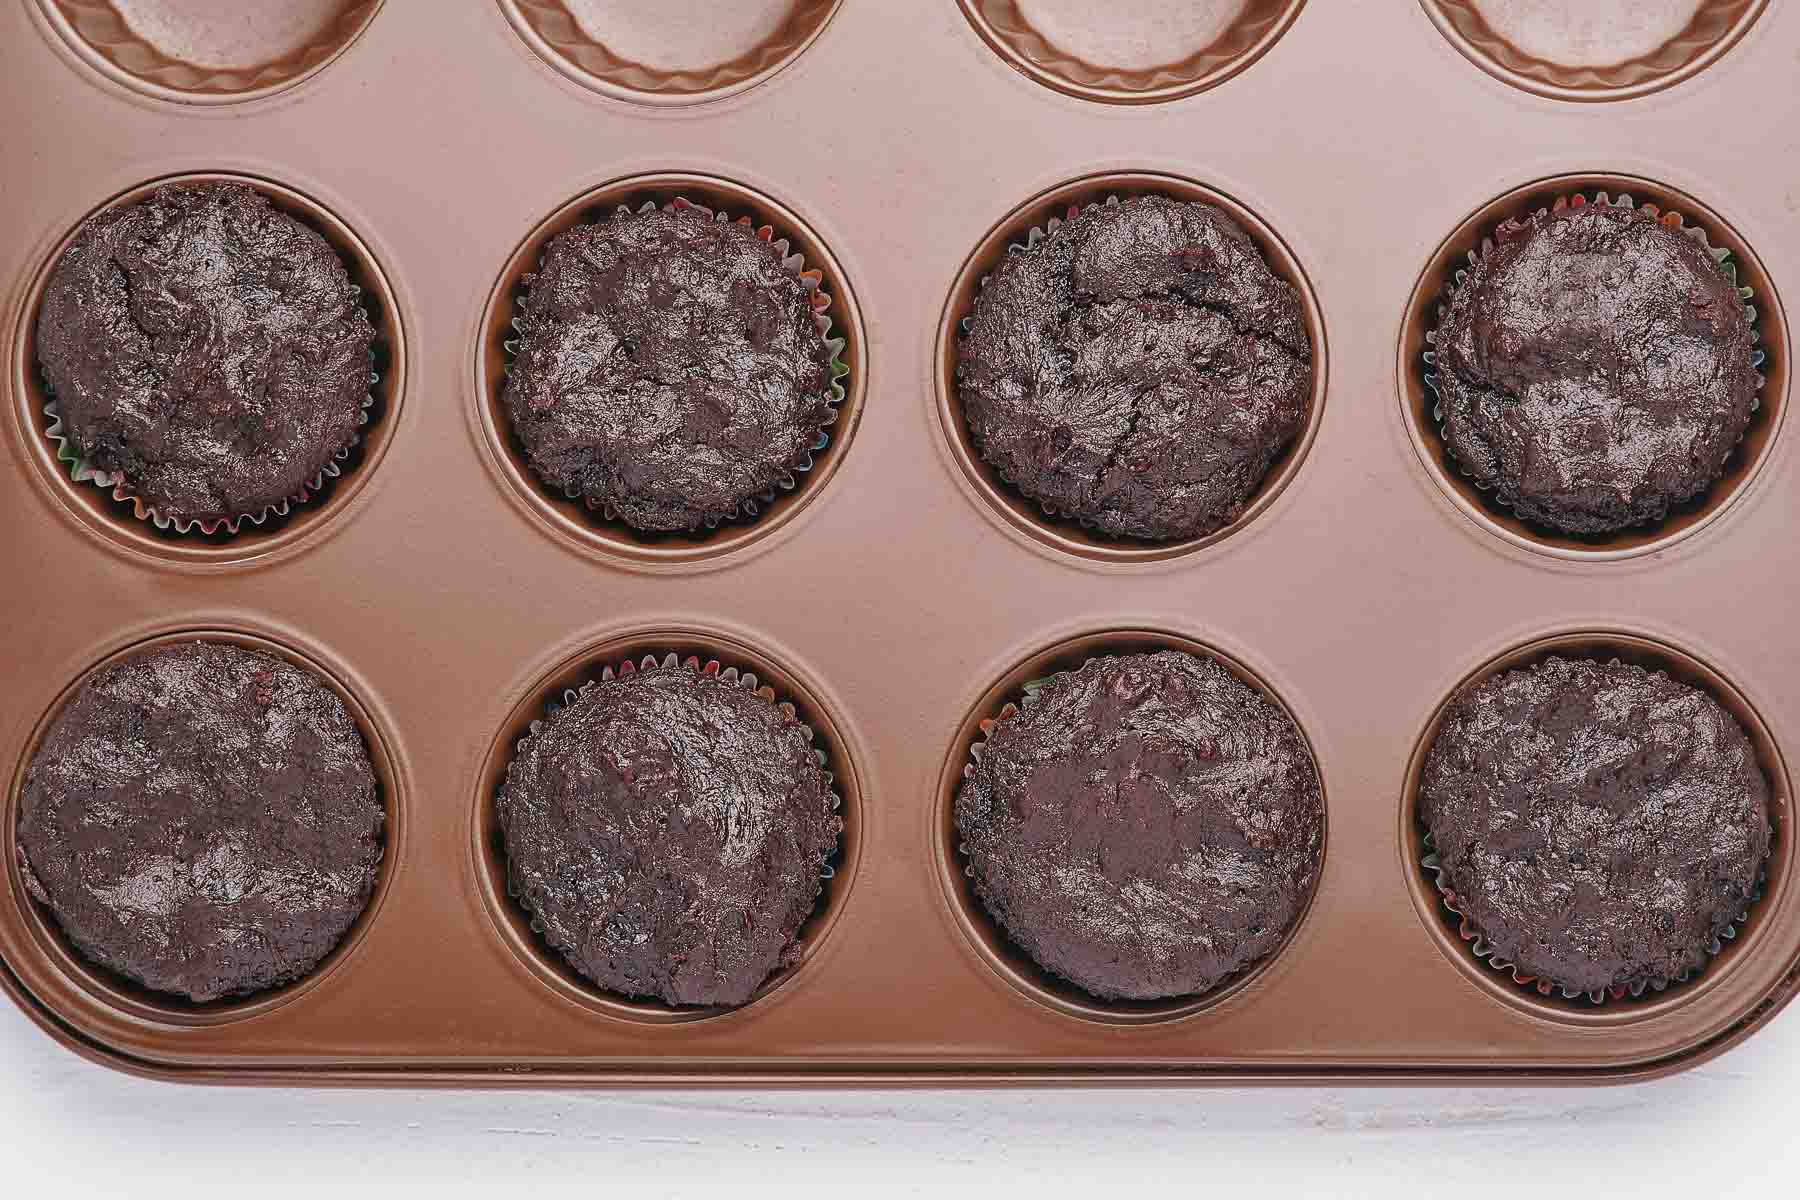 Eight baked chocolate cupcakes in a muffin pan.